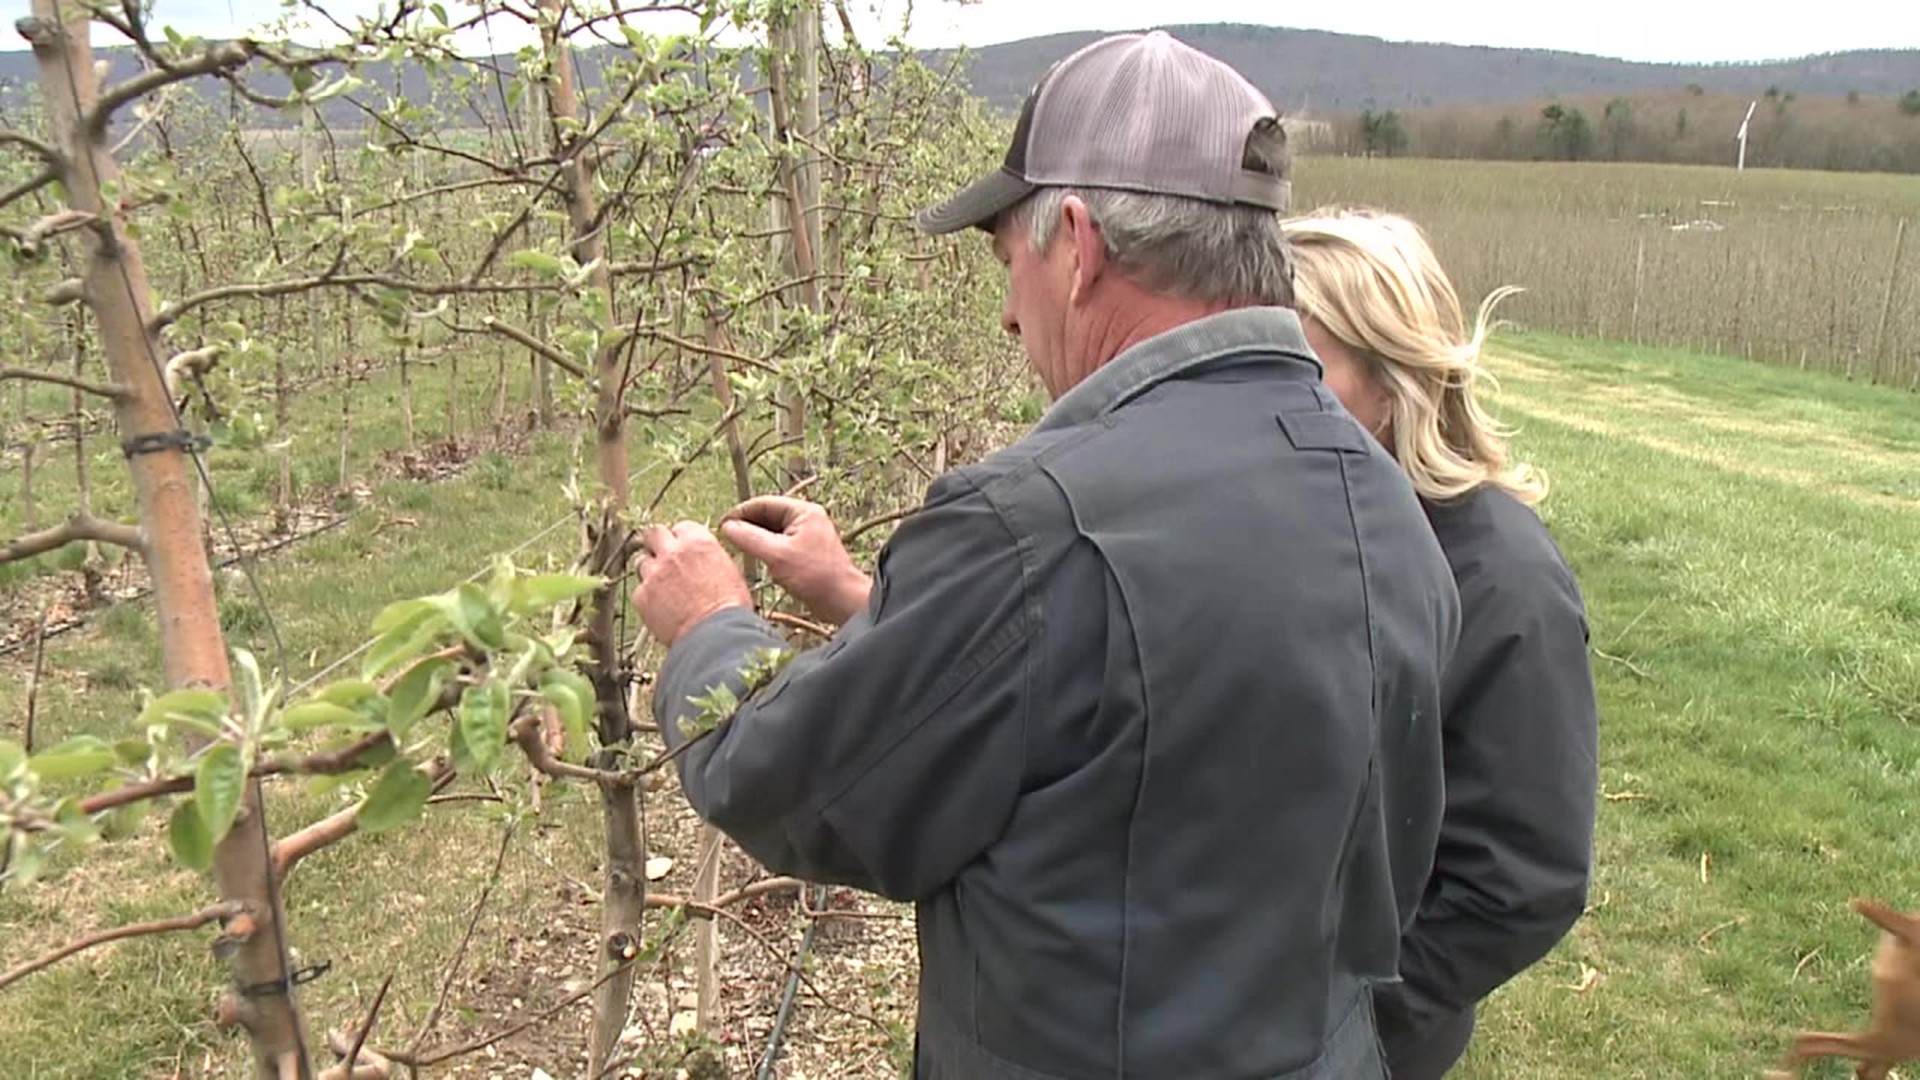 Fruit farmers are keeping a close eye on the upcoming cold temperatures, and it's not the first time this year things have gone wrong for their crops.